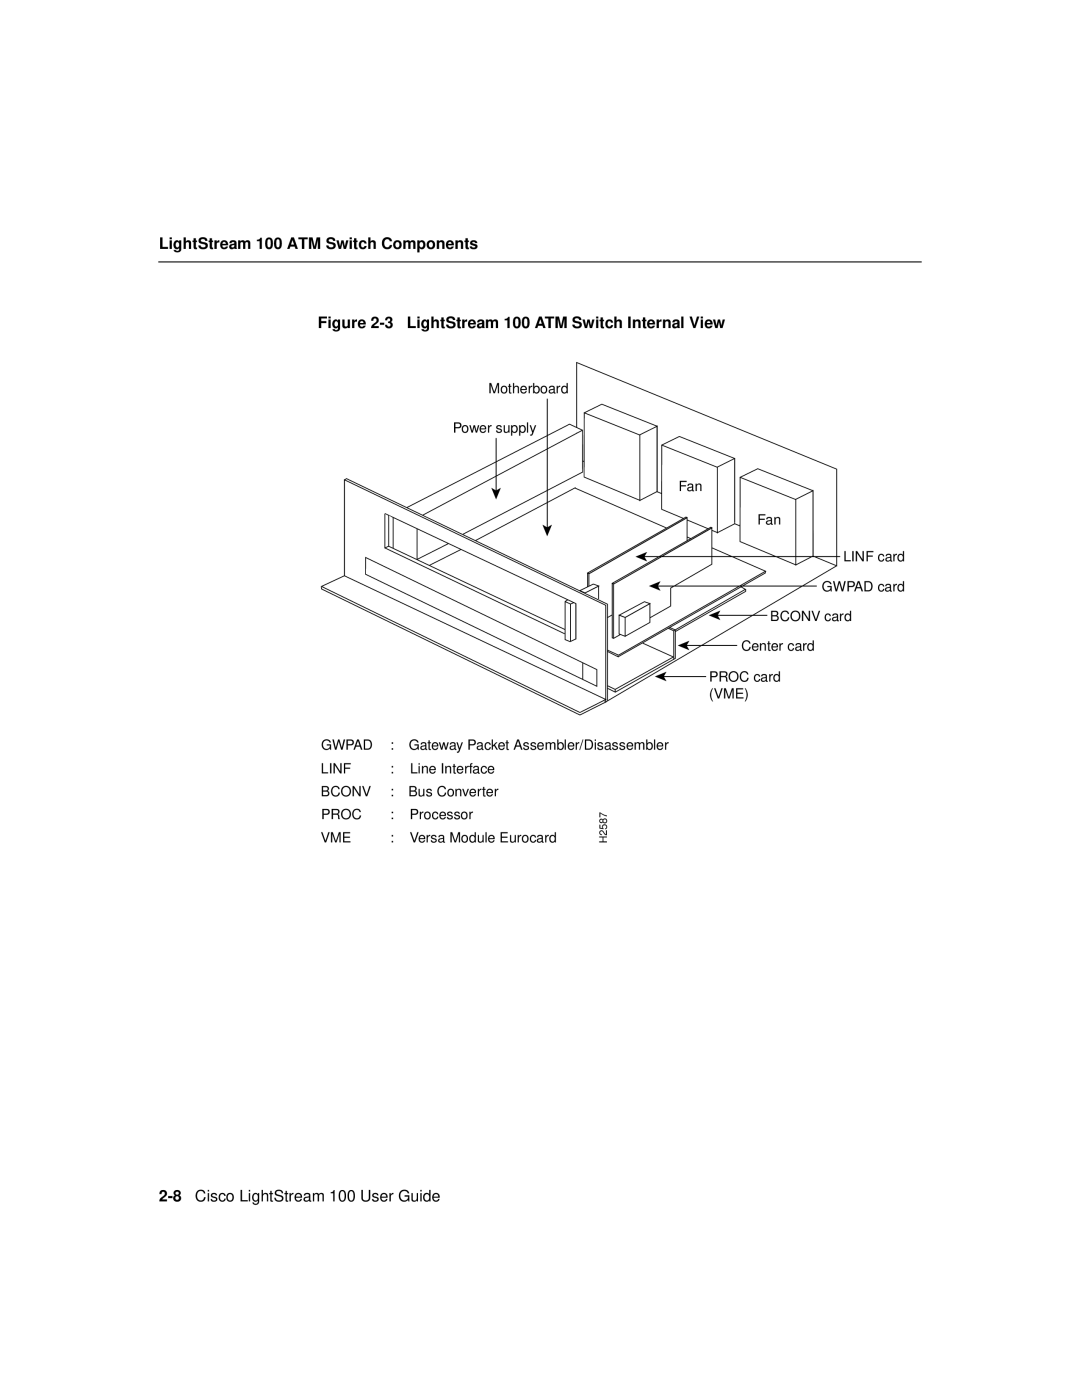 Cisco Systems manual LightStream 100 ATM Switch Components, 3 LightStream 100 ATM Switch Internal View, H2587 